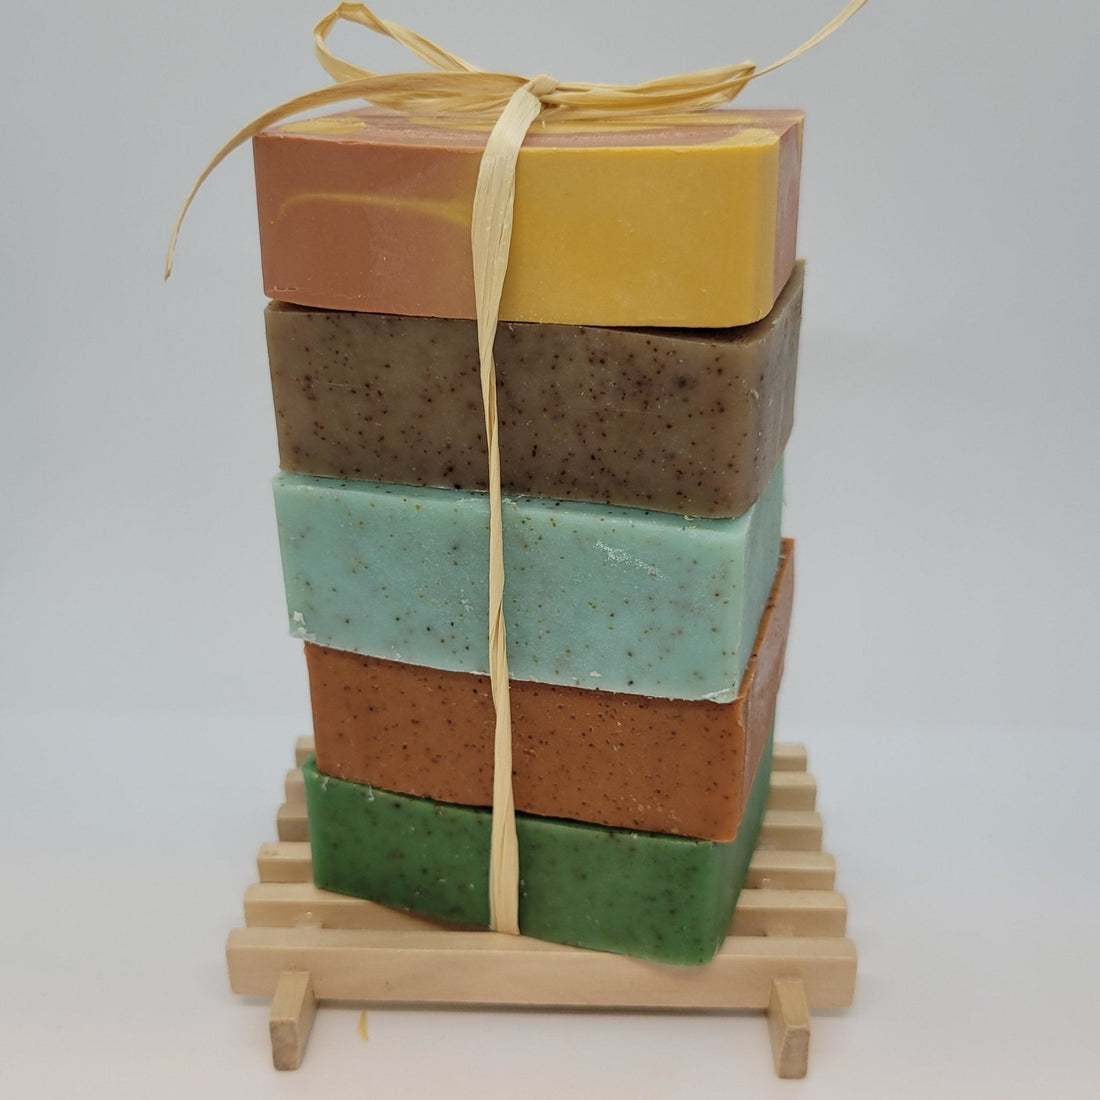 Top 5 Things You Will Like About Our Natural Soap For Men Set - Steel & Saffron Bath Boutique Inc.